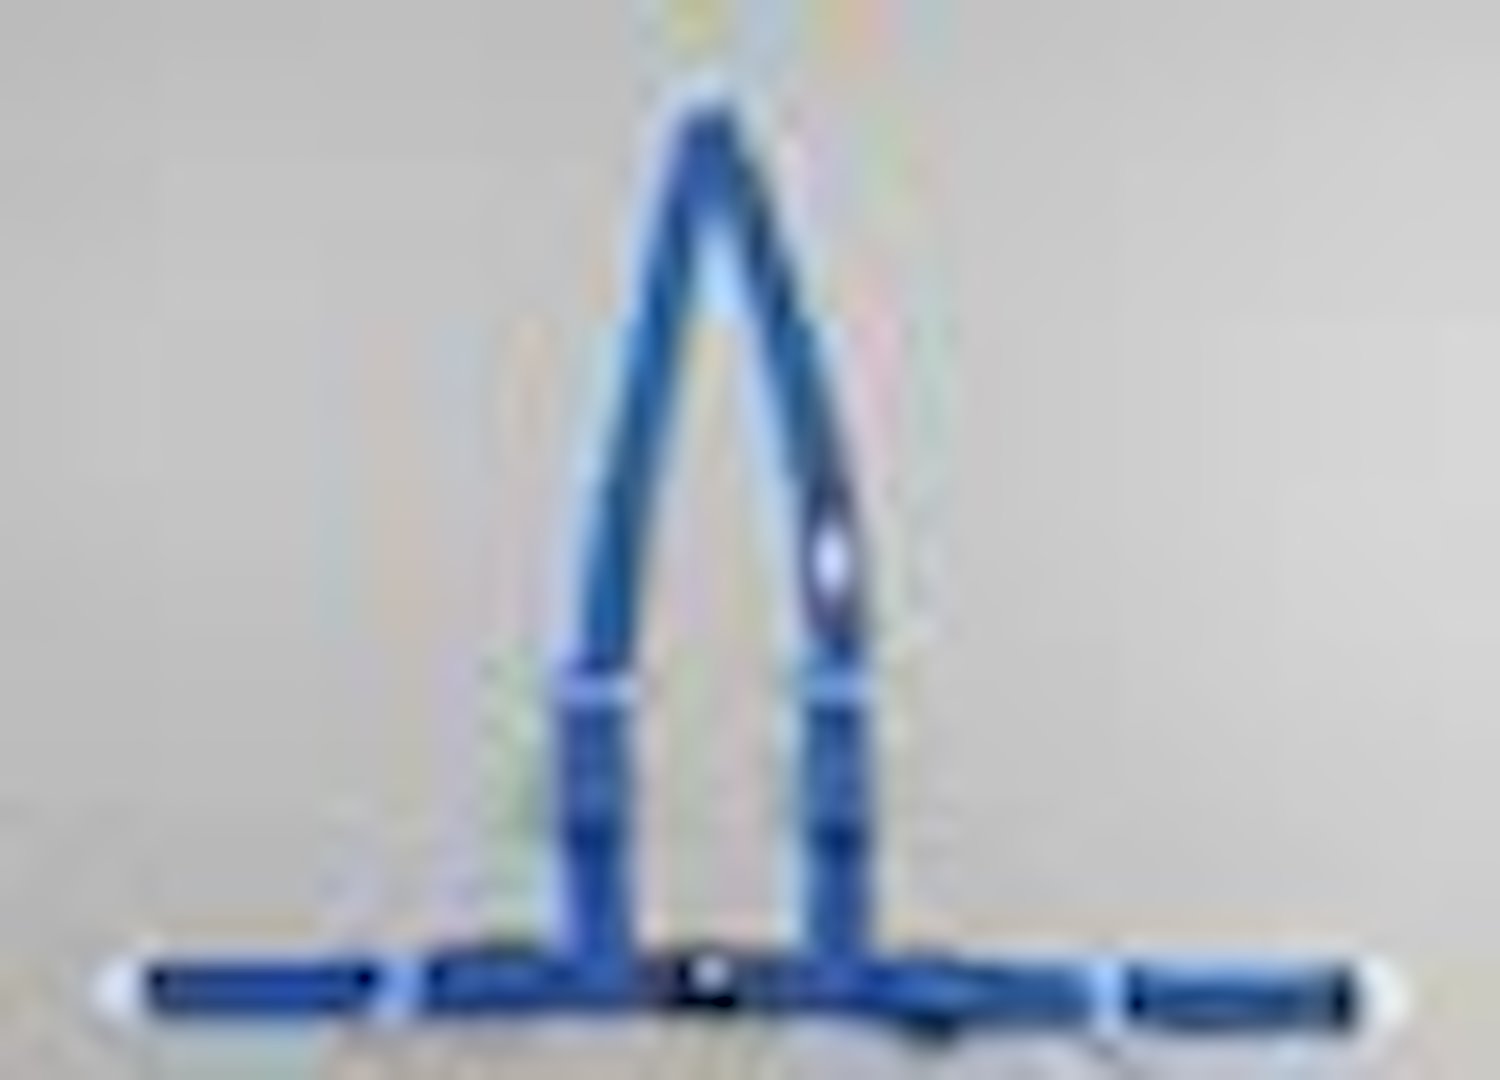 NON-SFI B&T HARNESS 2 PULL DOWN Lap Belt 2 S. H. V ROLL BAR Mount ALL WRAP ENDS BLUE